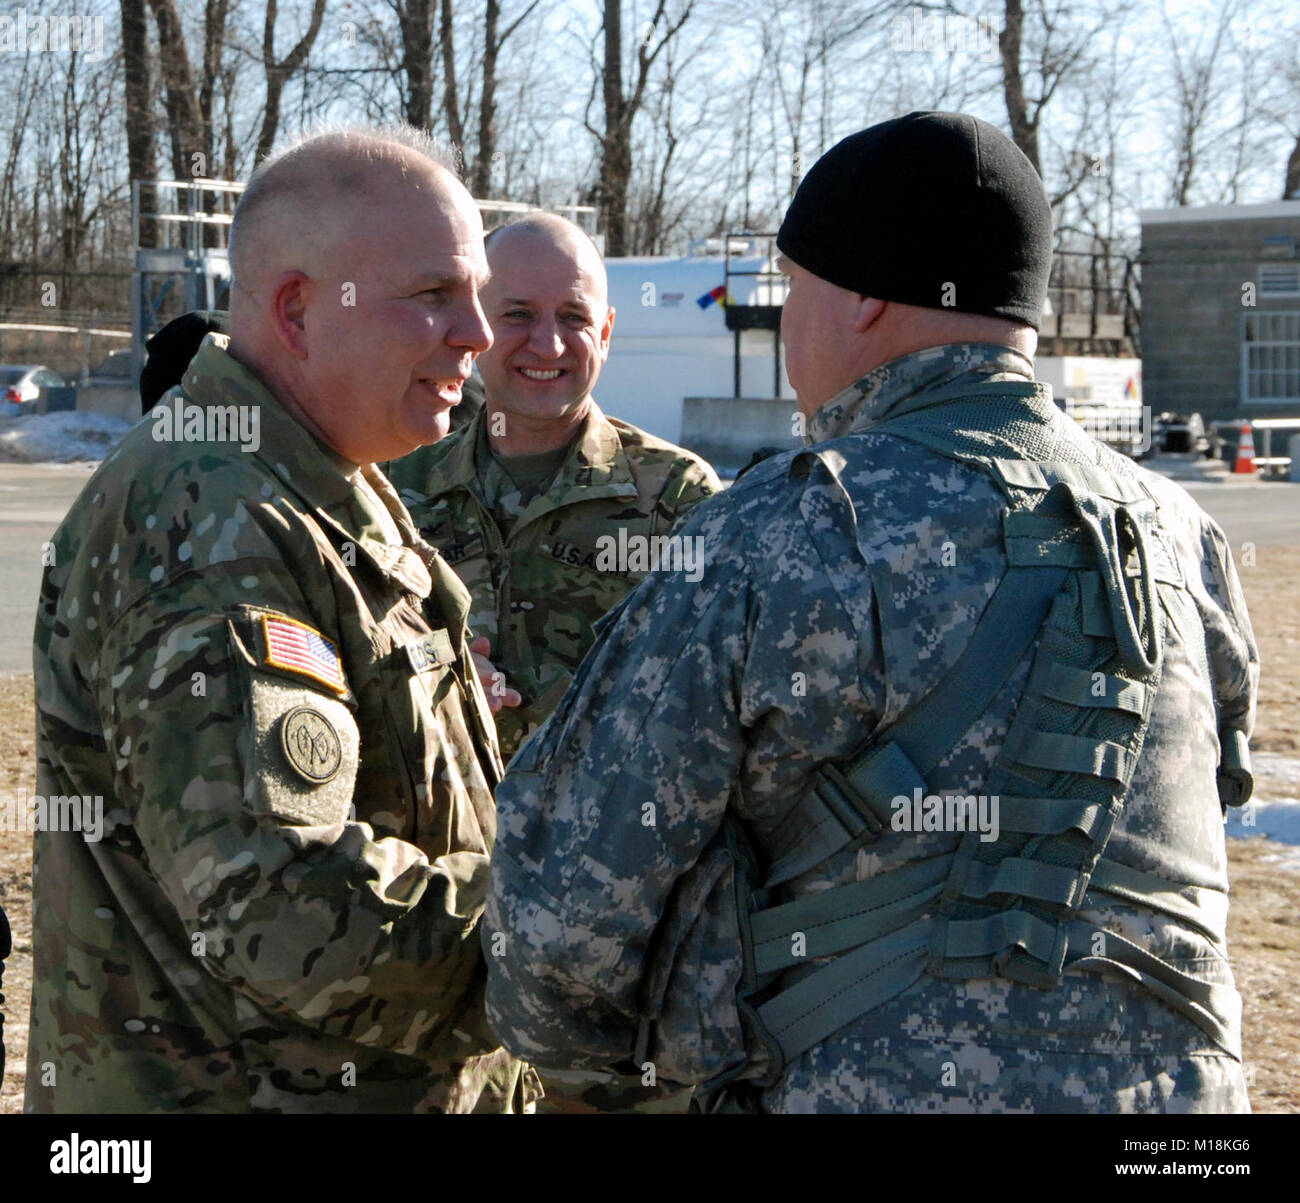 Major General Ray Shields (left), the commanderof the New York Army National Guard, congratulates Chief Warran Officer 5 Michael Johnson at the conclusion of his 'Final Flight' as an Army Pilot at Army Aviation Support Facility #3 in Latham, N.Y. on Jan. 25, 2018 as Col. Mark Slusar, the New York State Aviation Officer, looks on. Johnson celebrated his final flight after 35 years of service. ( U.S.Army National Guard Stock Photo